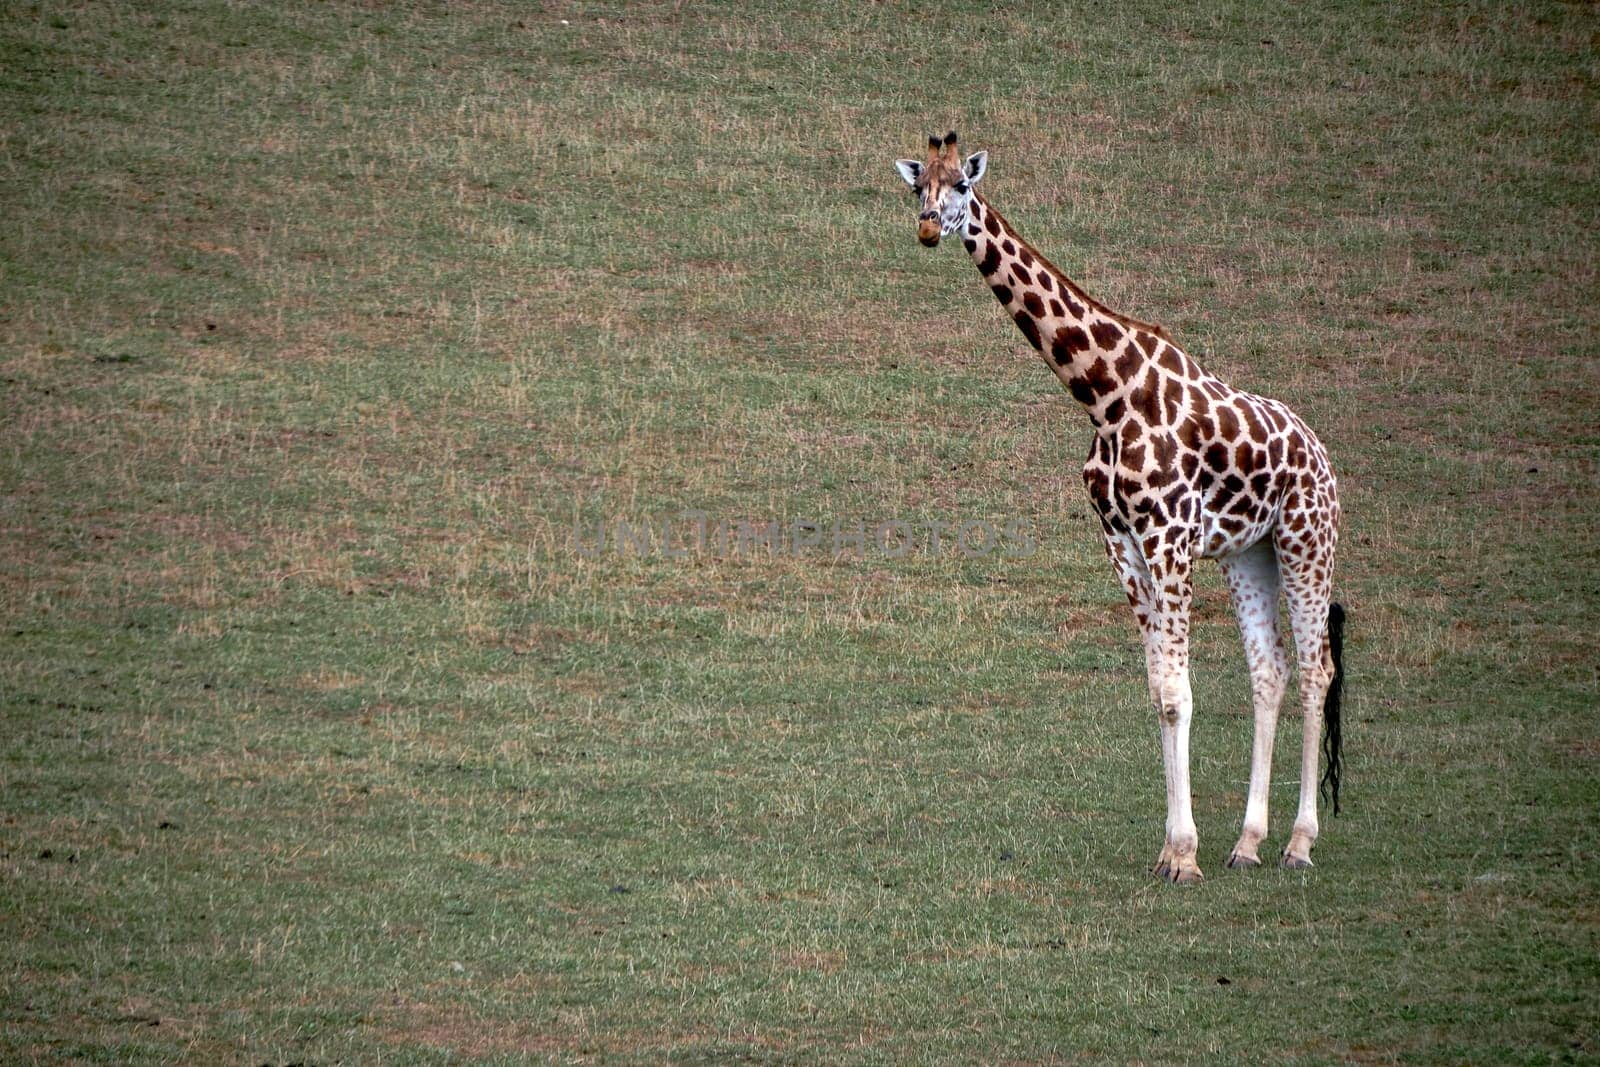 A lonely giraffe in the green grassland. Empty space, long neck, large, vegetation, light.